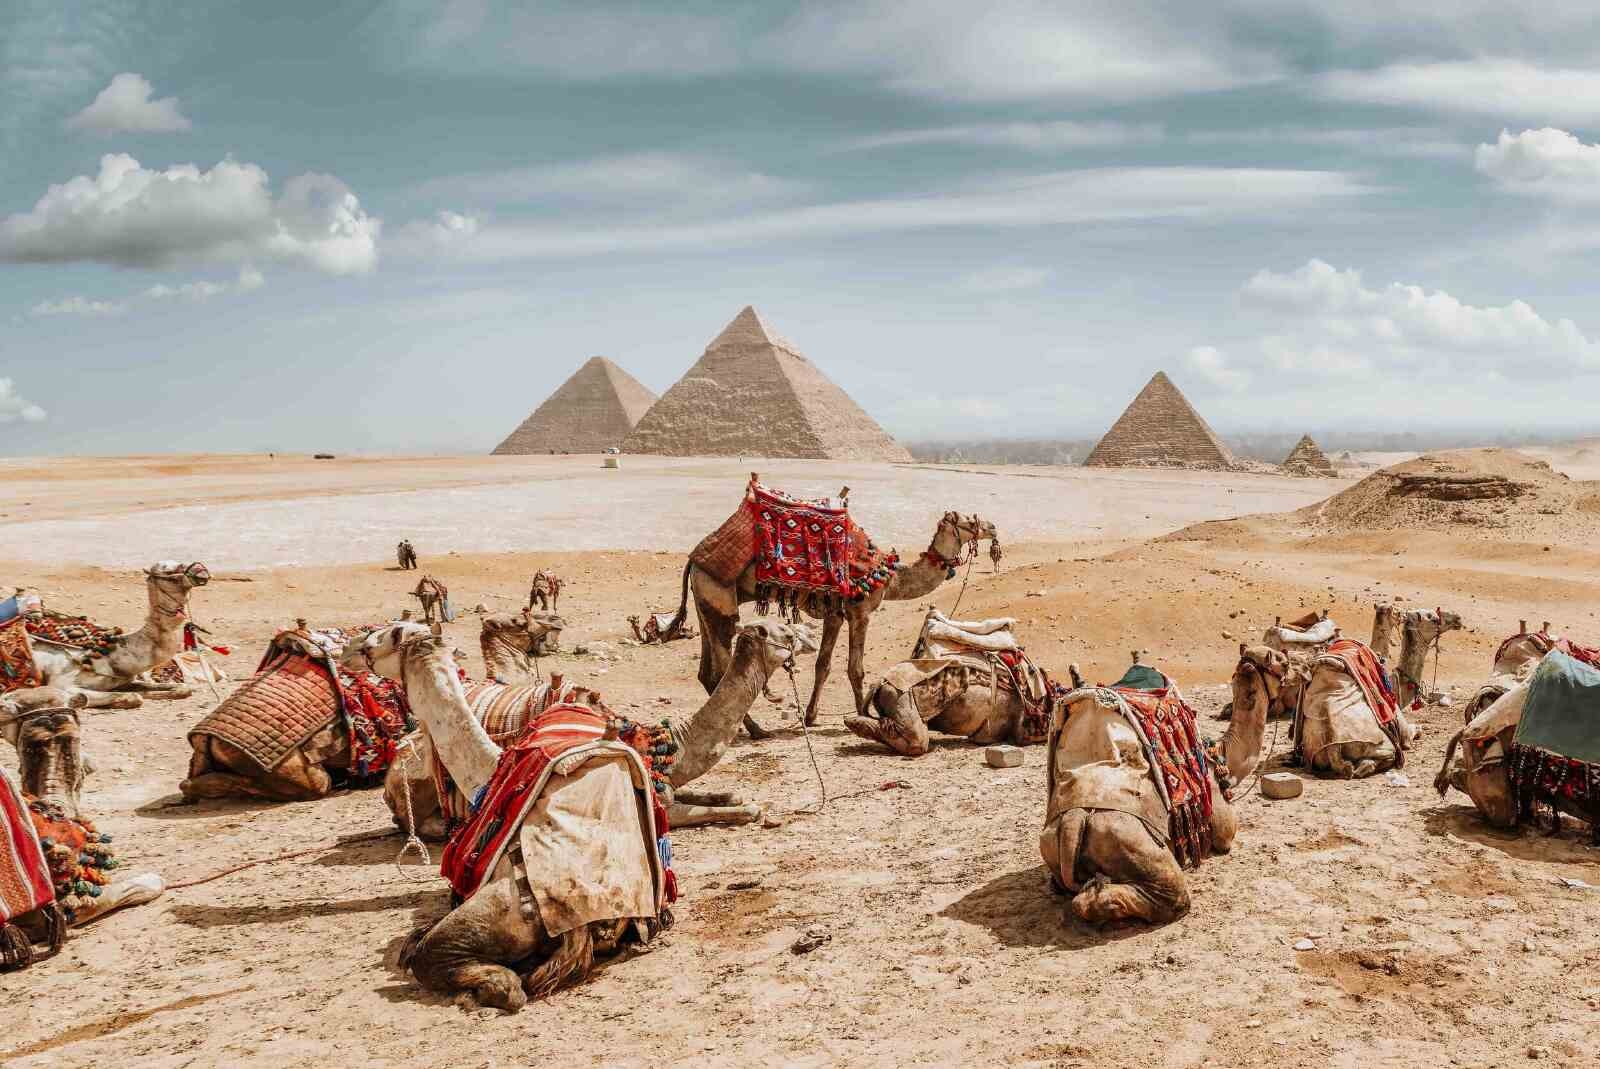 How to spend 7 days in Egypt?